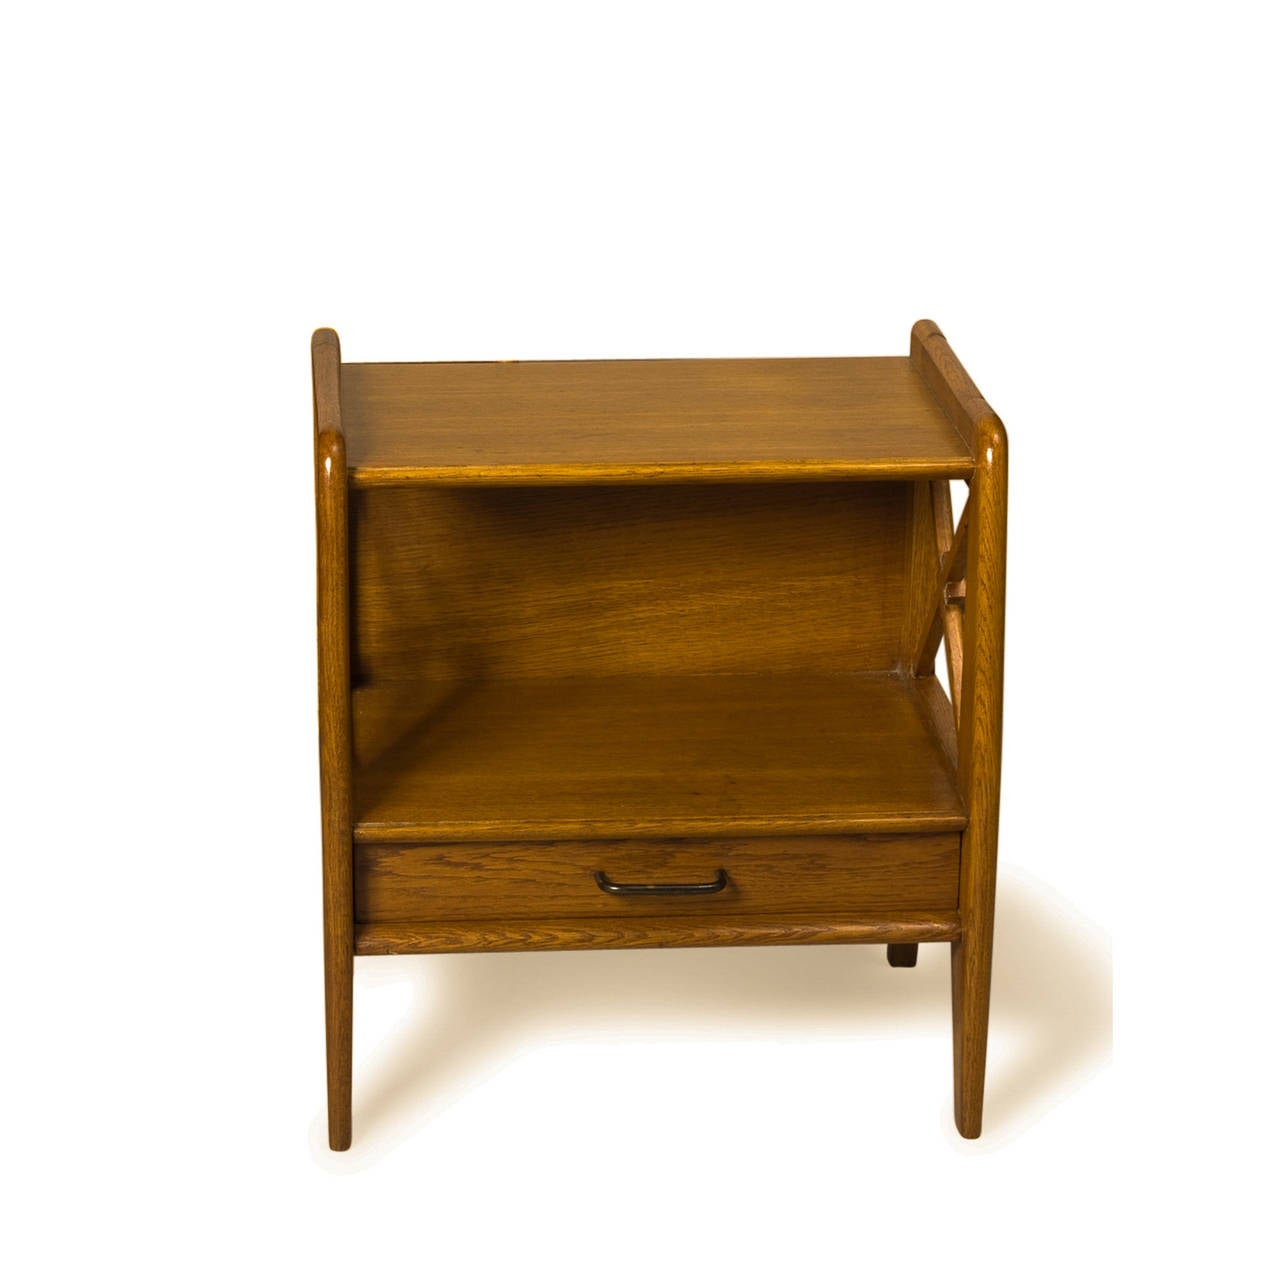 Pair of single drawer oak end tables, croisillon sides with lower drawer forming shelf, gently tapering legs, by Jacques Adnet, French 1950s. Height 21 1/2 in, top surface height 20 1/2 in, lower shelf height 10 in, width 19 1/2 in, depth 12 in.